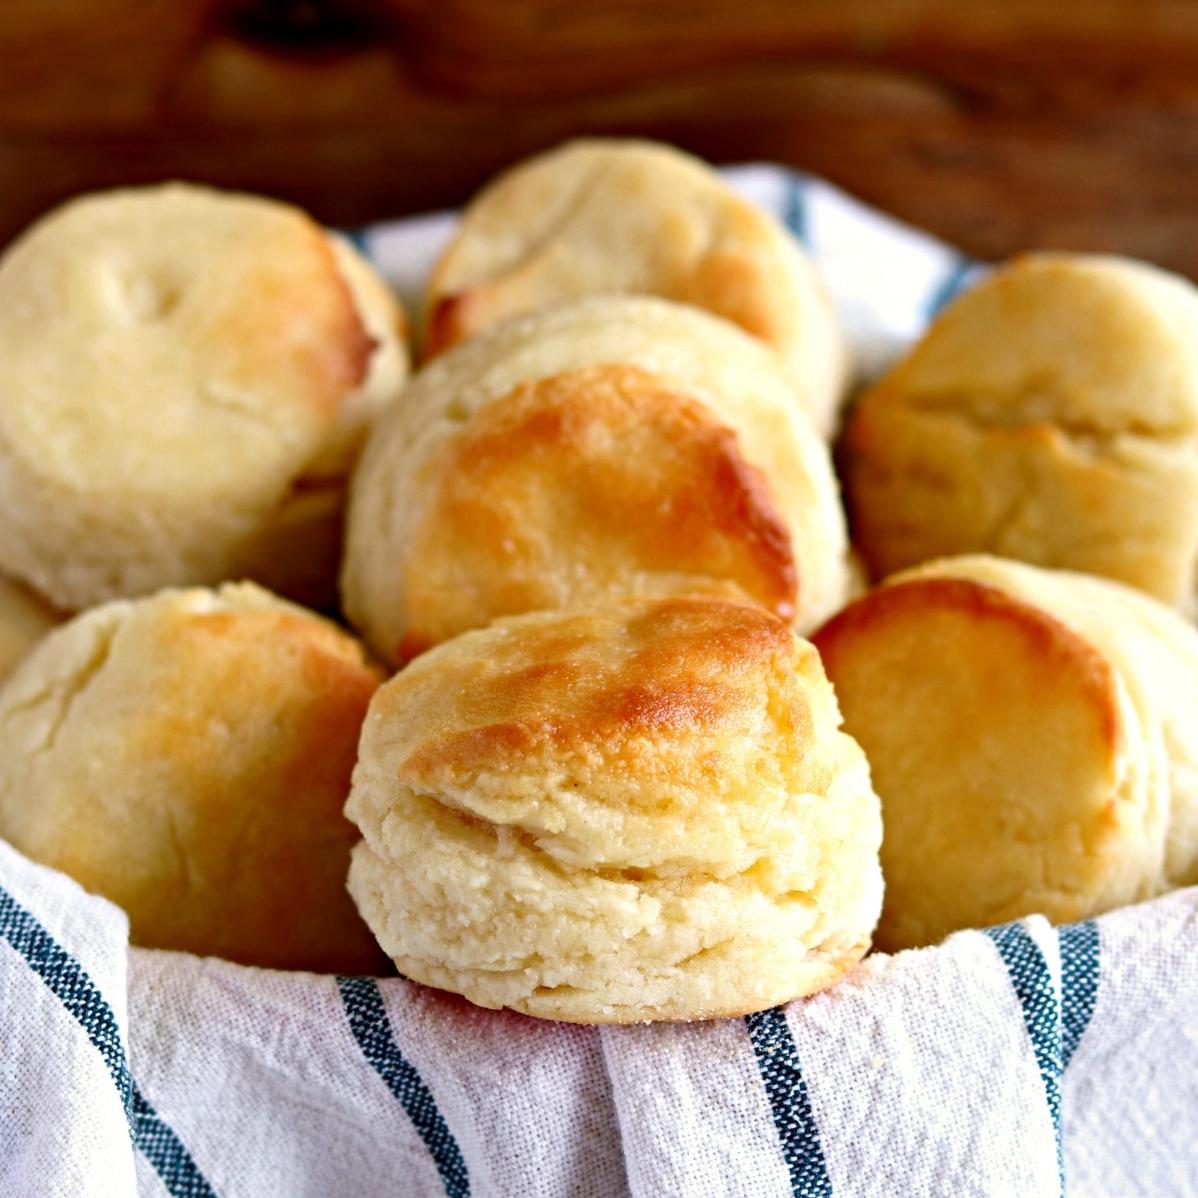  Enjoy these mouthwatering biscuits with a hot cup of coffee or tea.